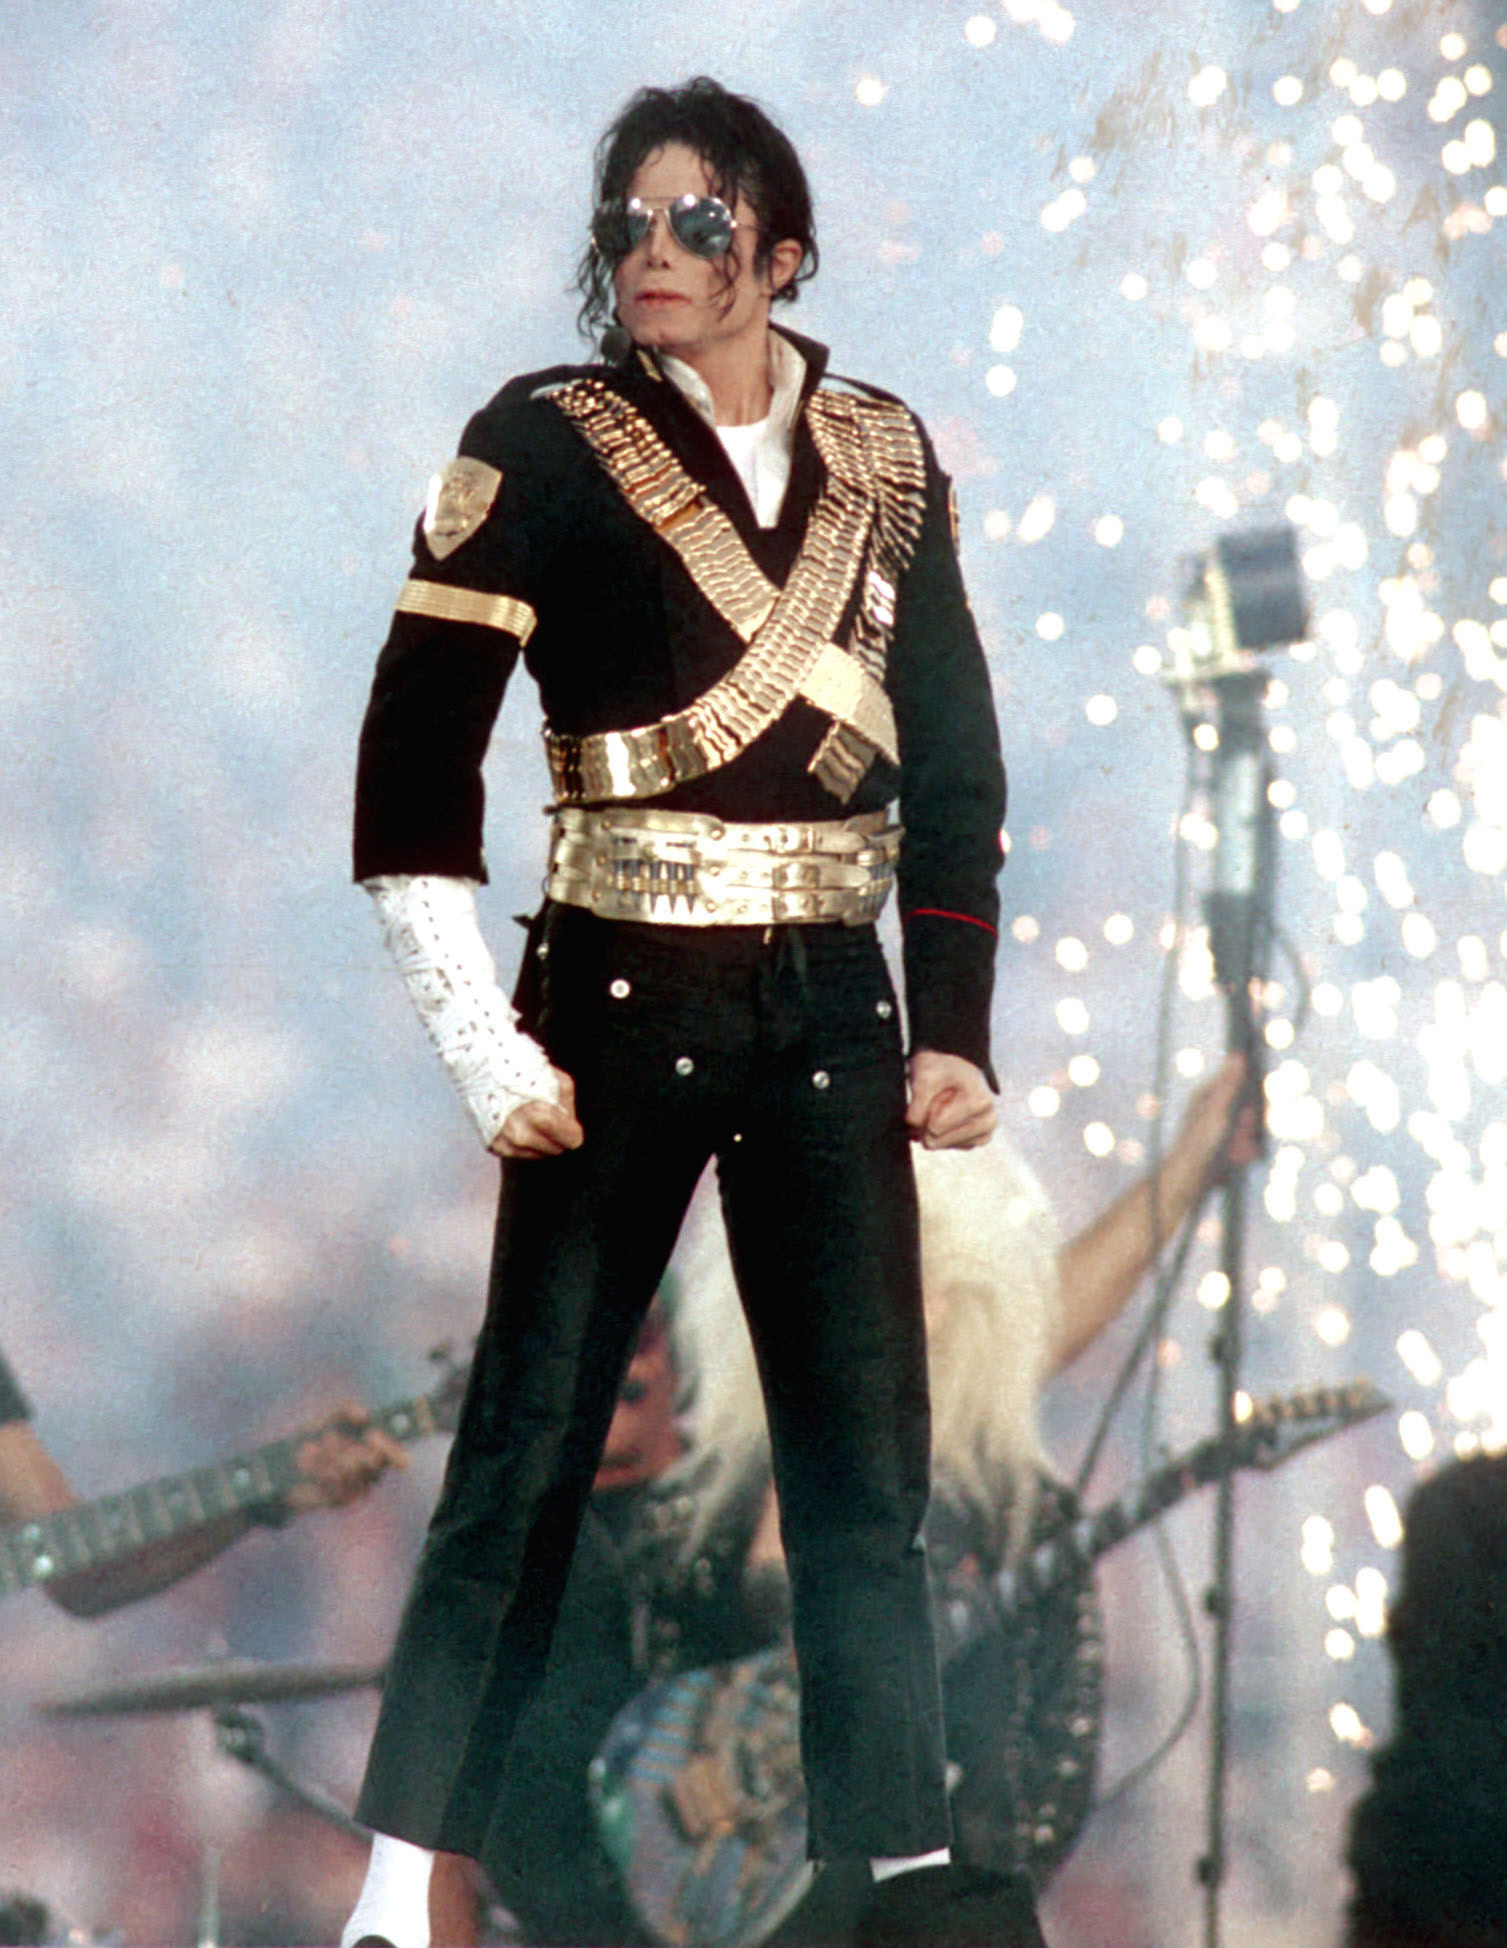 Michael Jackson performs during halftime of a 52-17 Dallas Cowboys win over the Buffalo Bills in Super Bowl XXVI